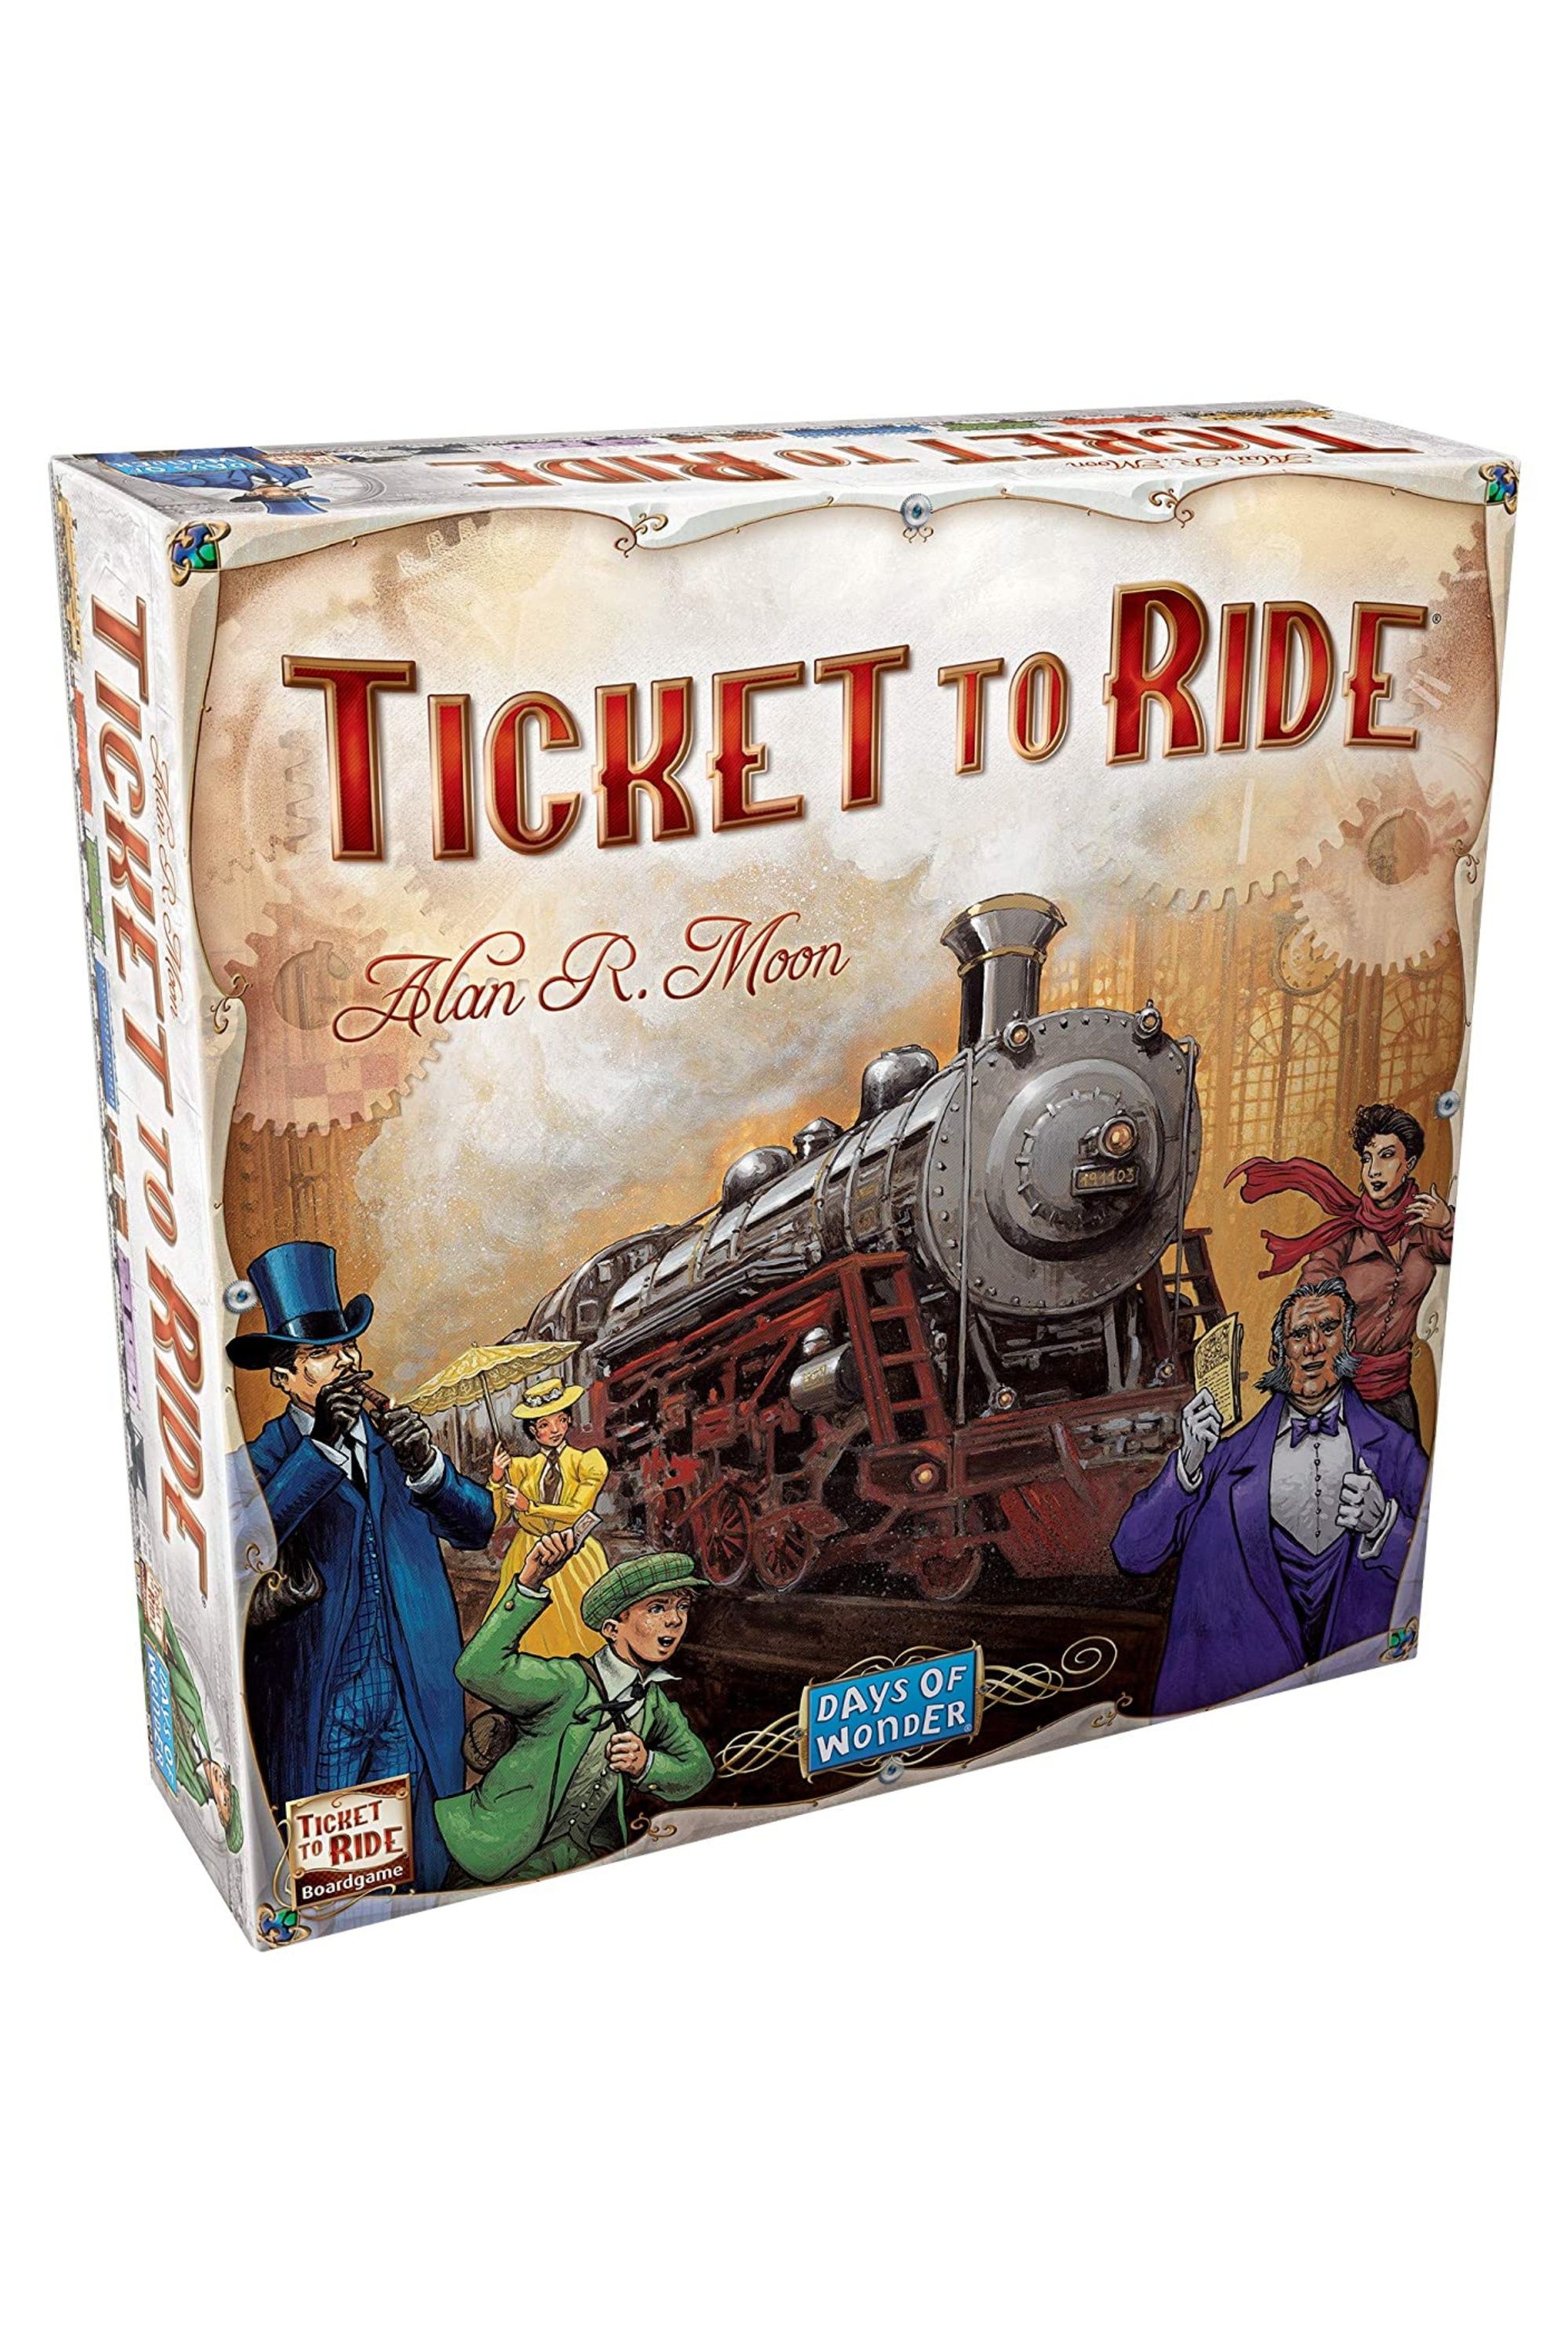 Ticket to Ride board game box